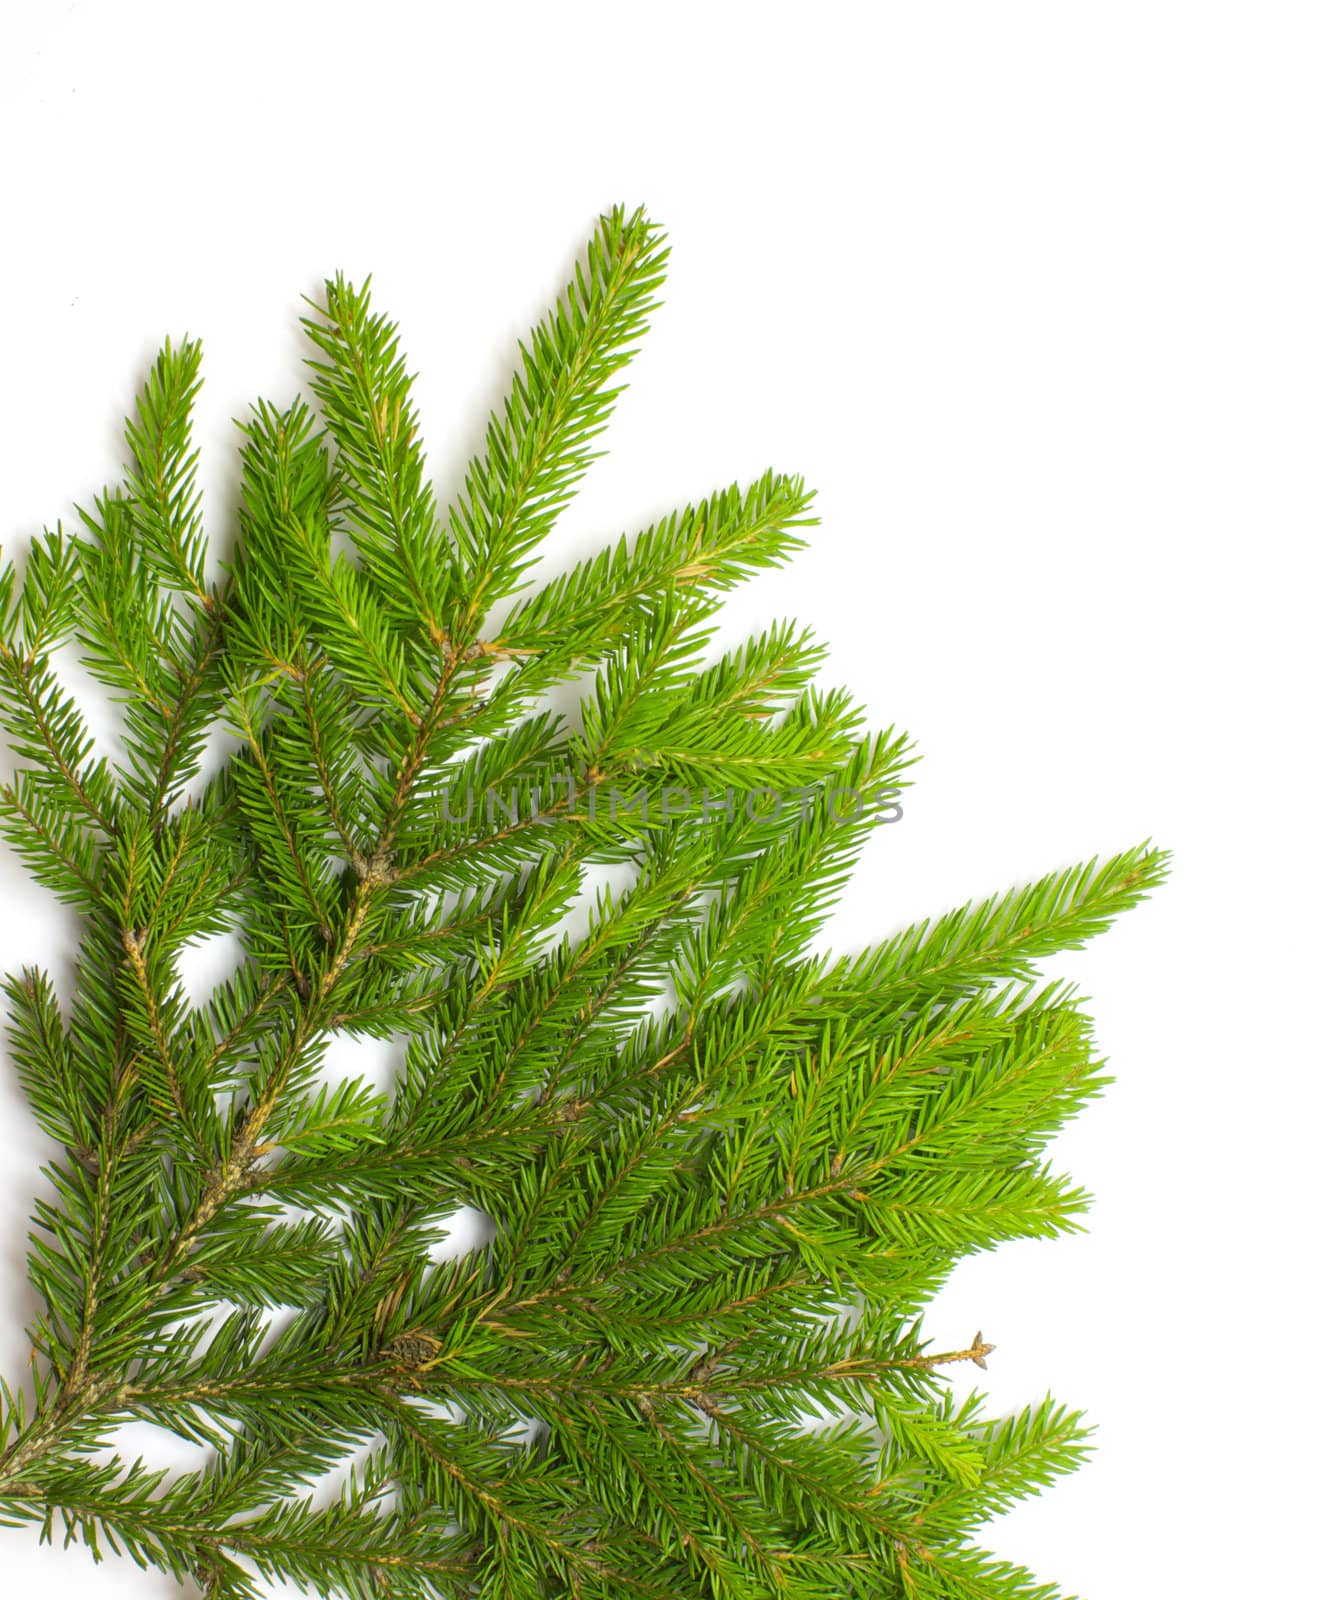 Green fresh spruce branch isolated on white